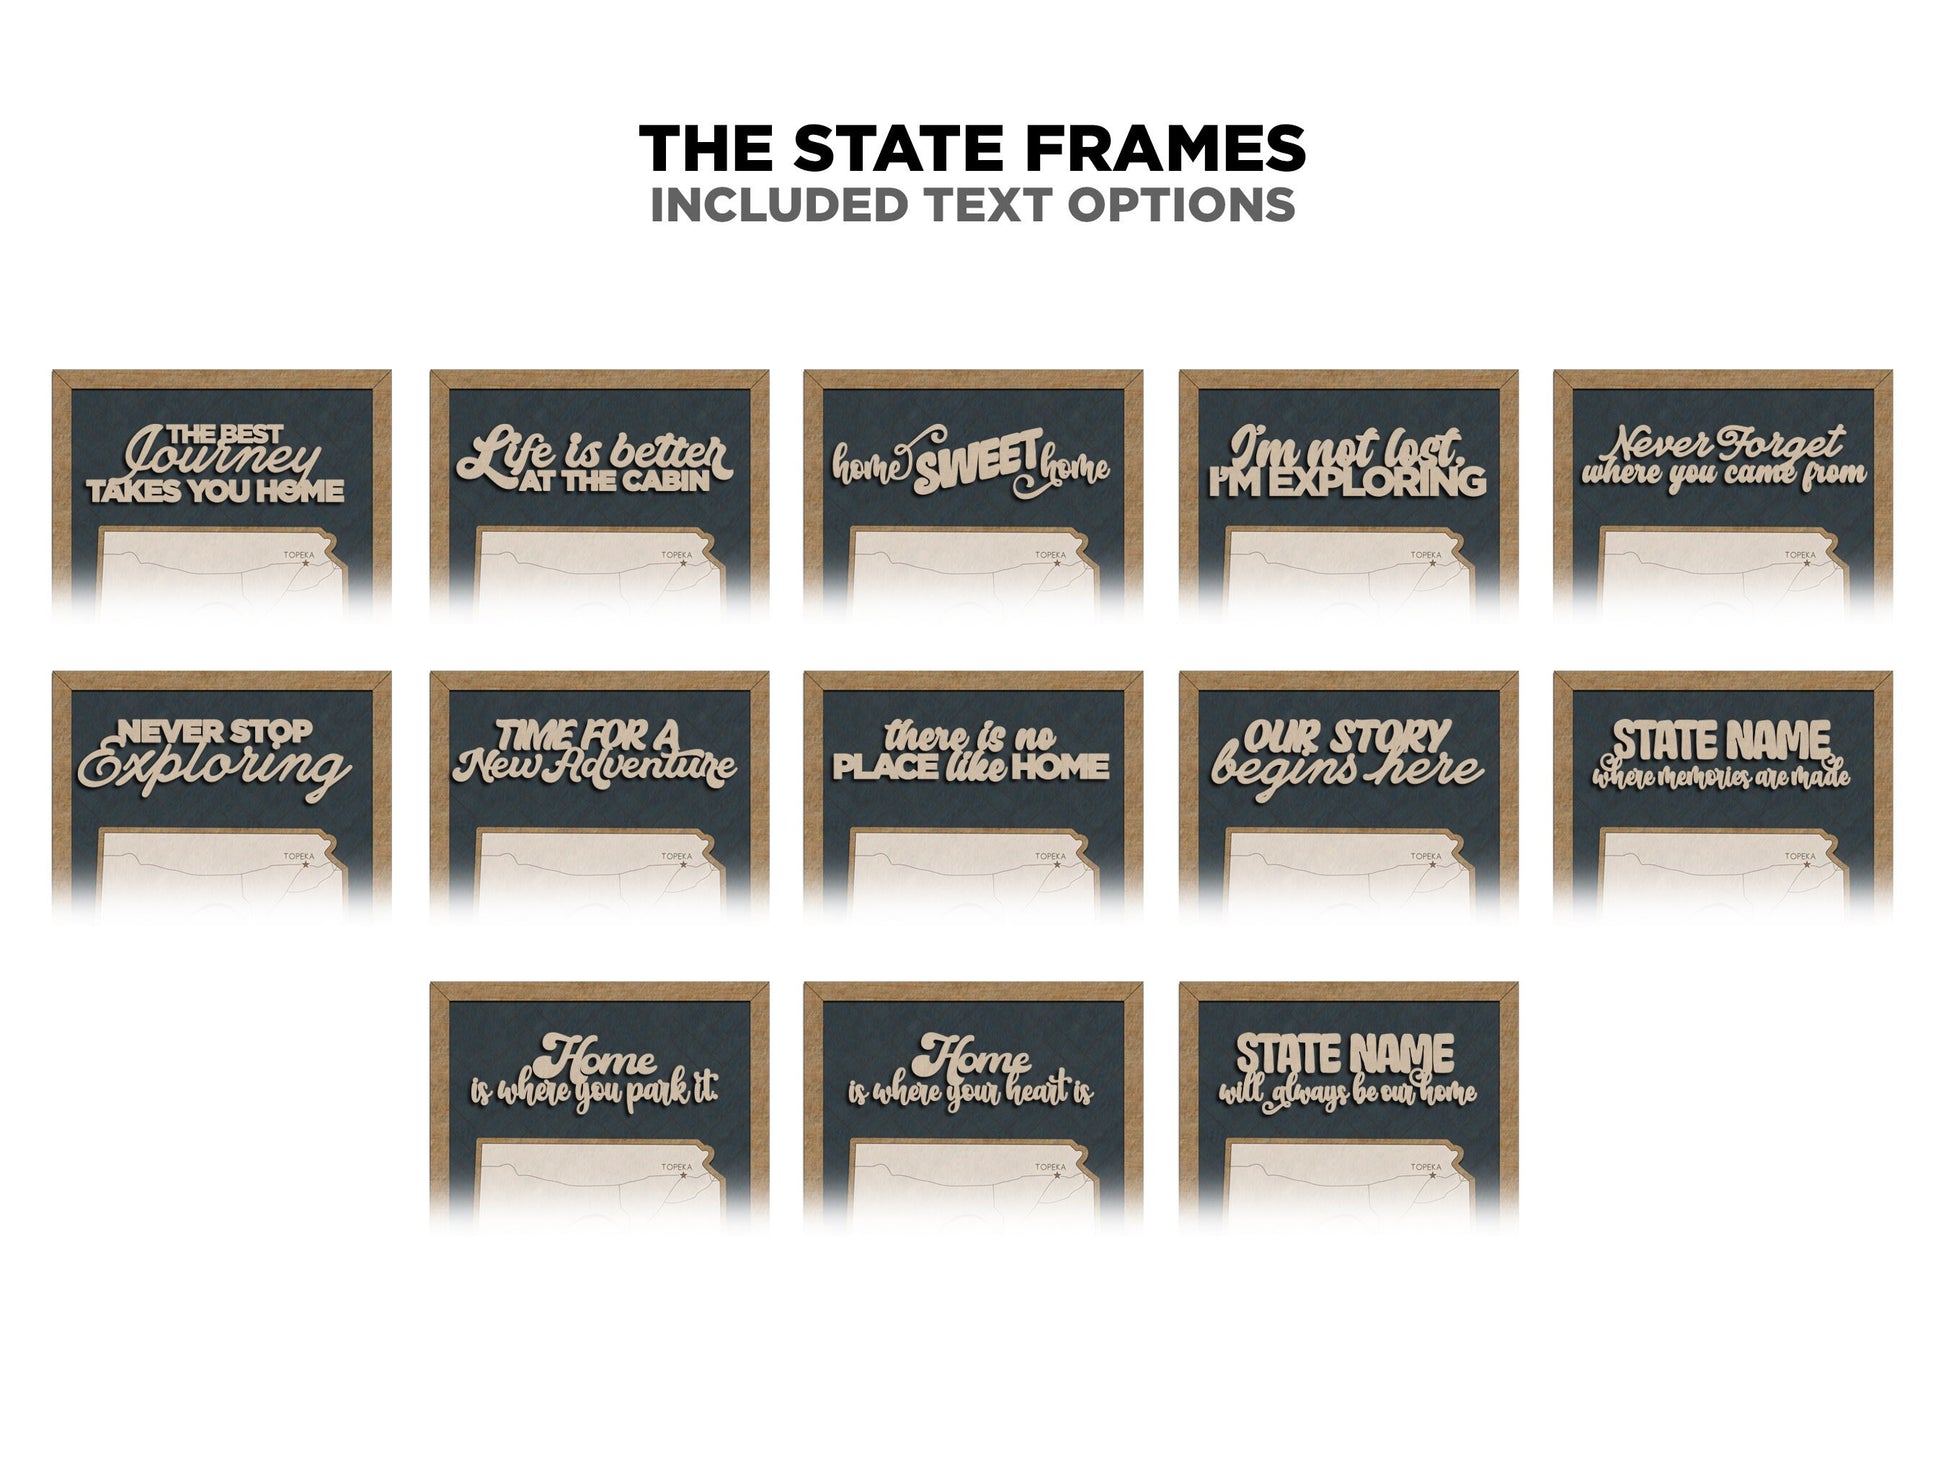 The Washington Frame - 13 text options, 12 backgrounds, 25 icons Included - Make over 7,500 designs - Glowforge & Lightburn Tested